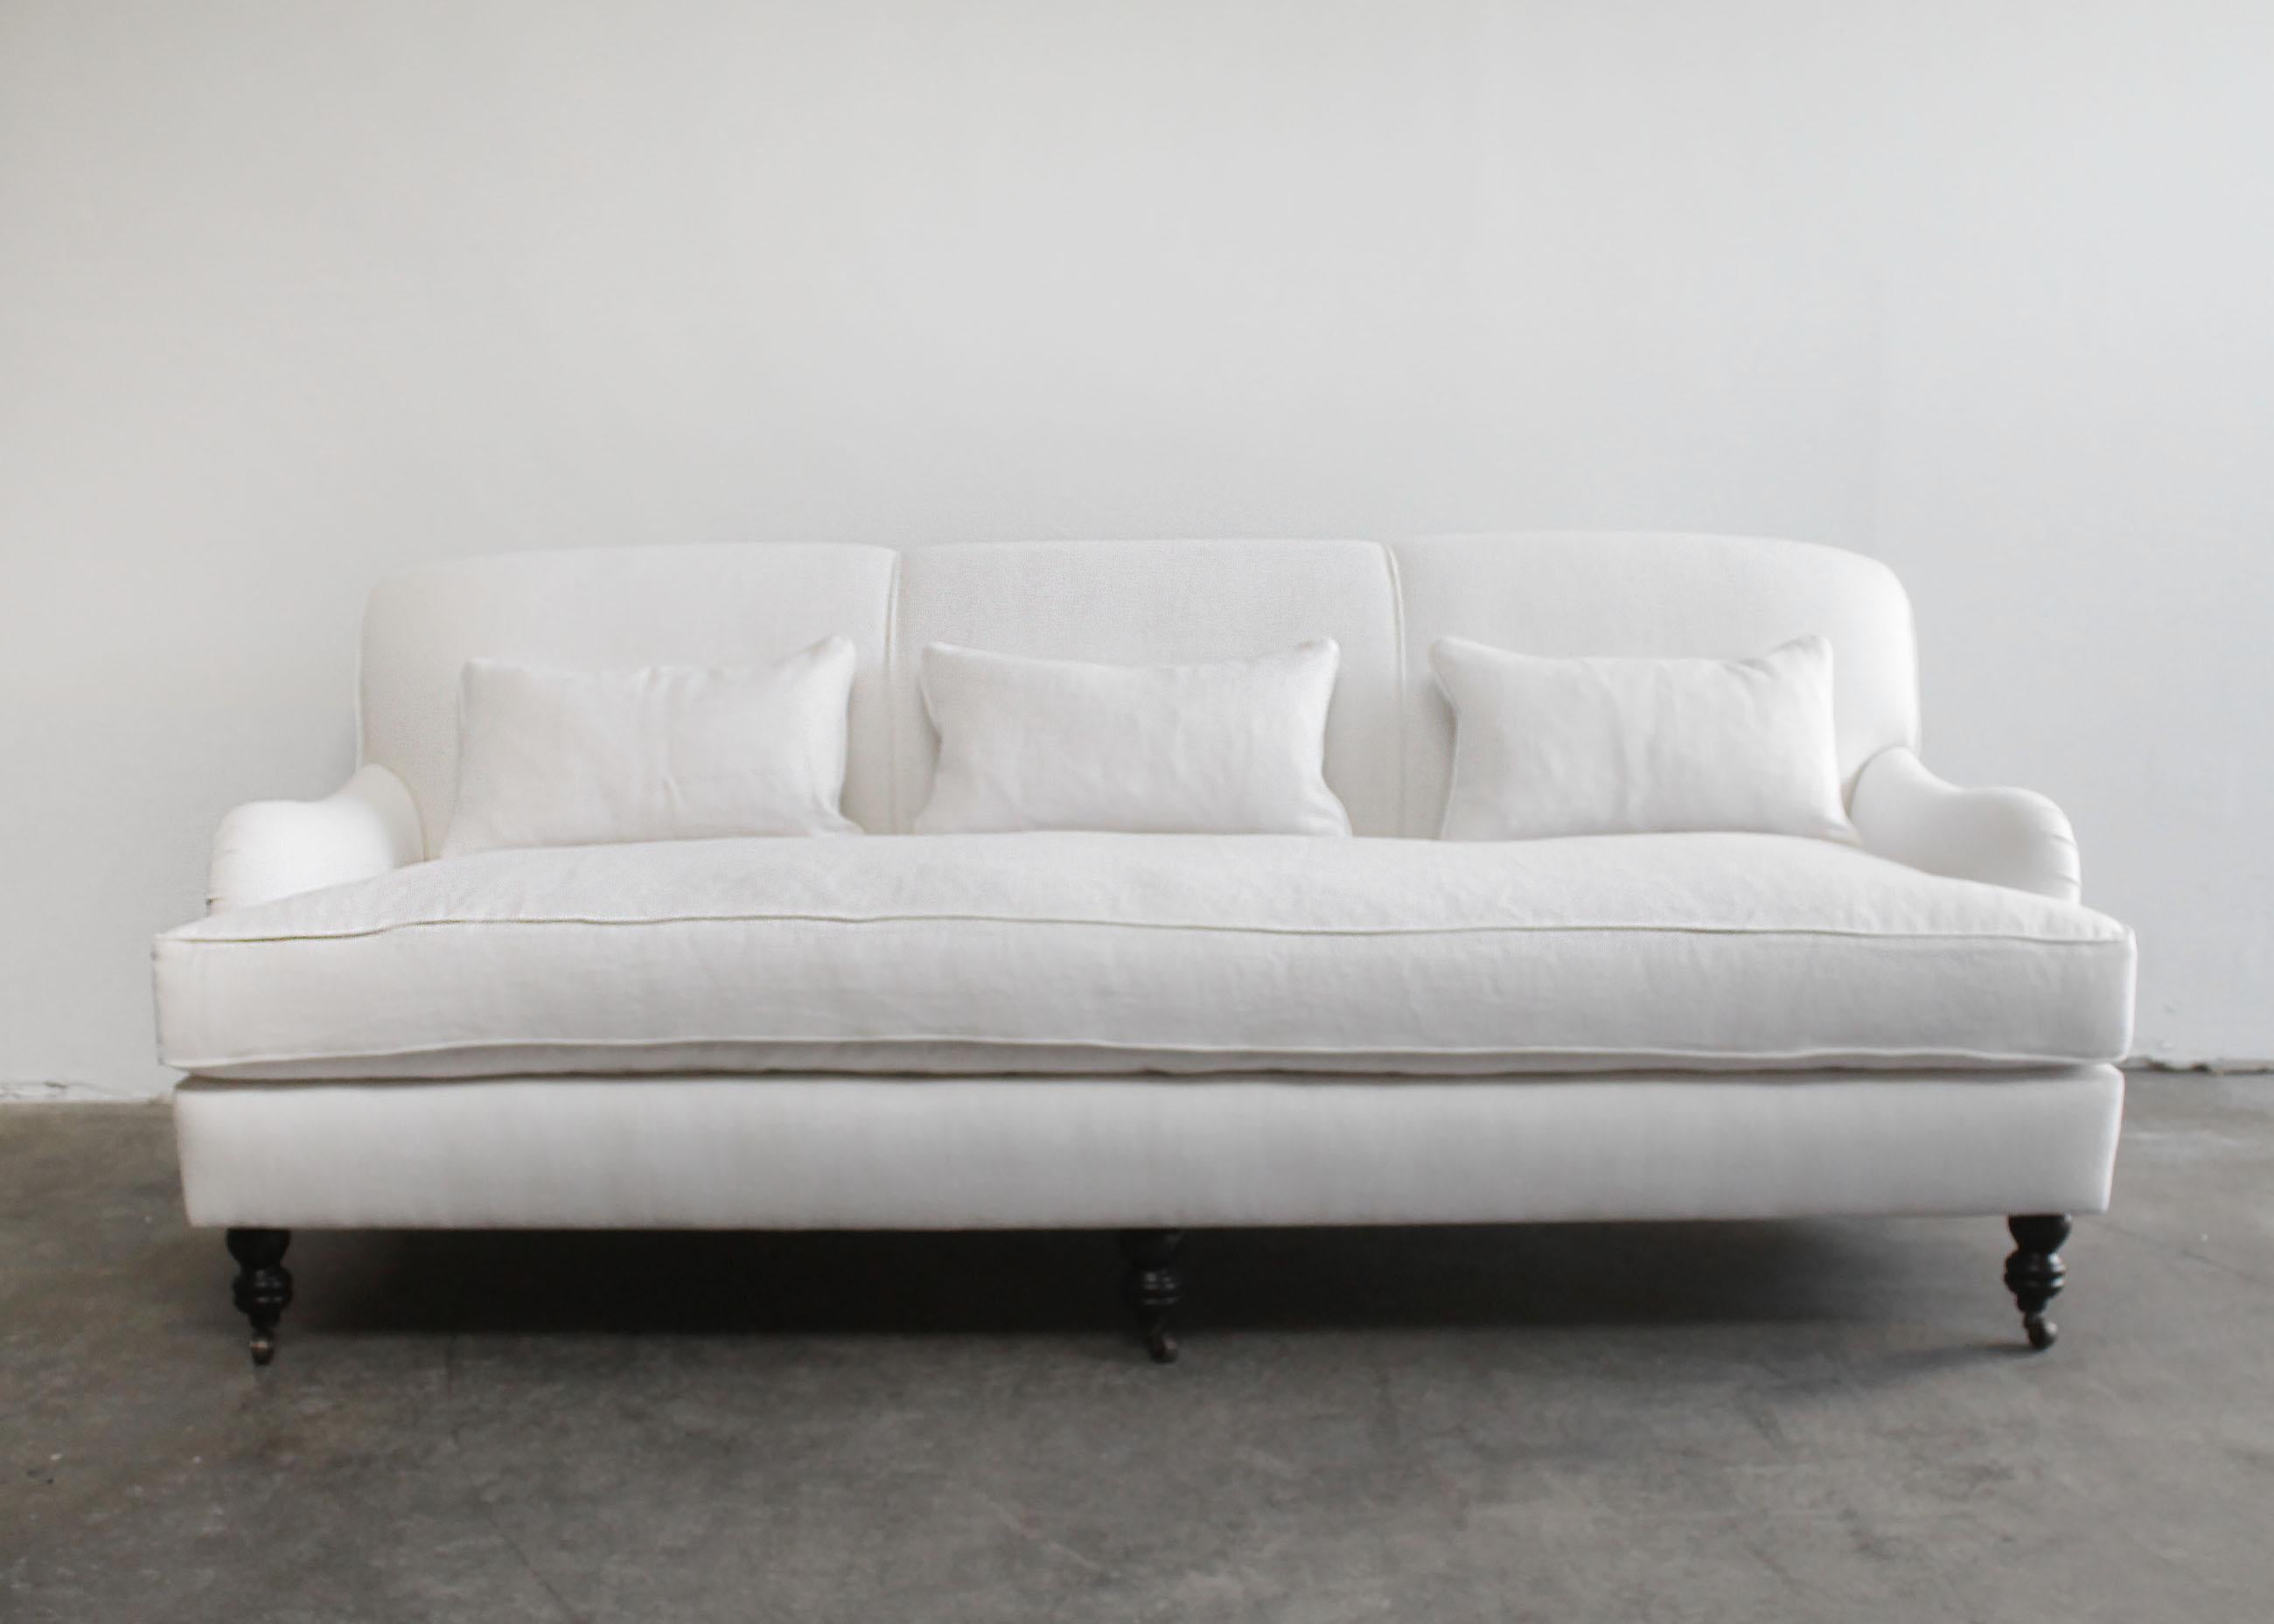 White linen English arm rolled back sofa with casters.
Custom made to order, upholstered in a heavy weight Belgian linen, with down feather seats.
Very comfortable to sit in, with a medium density foam core seat, wrapped with a 90/10 down feather